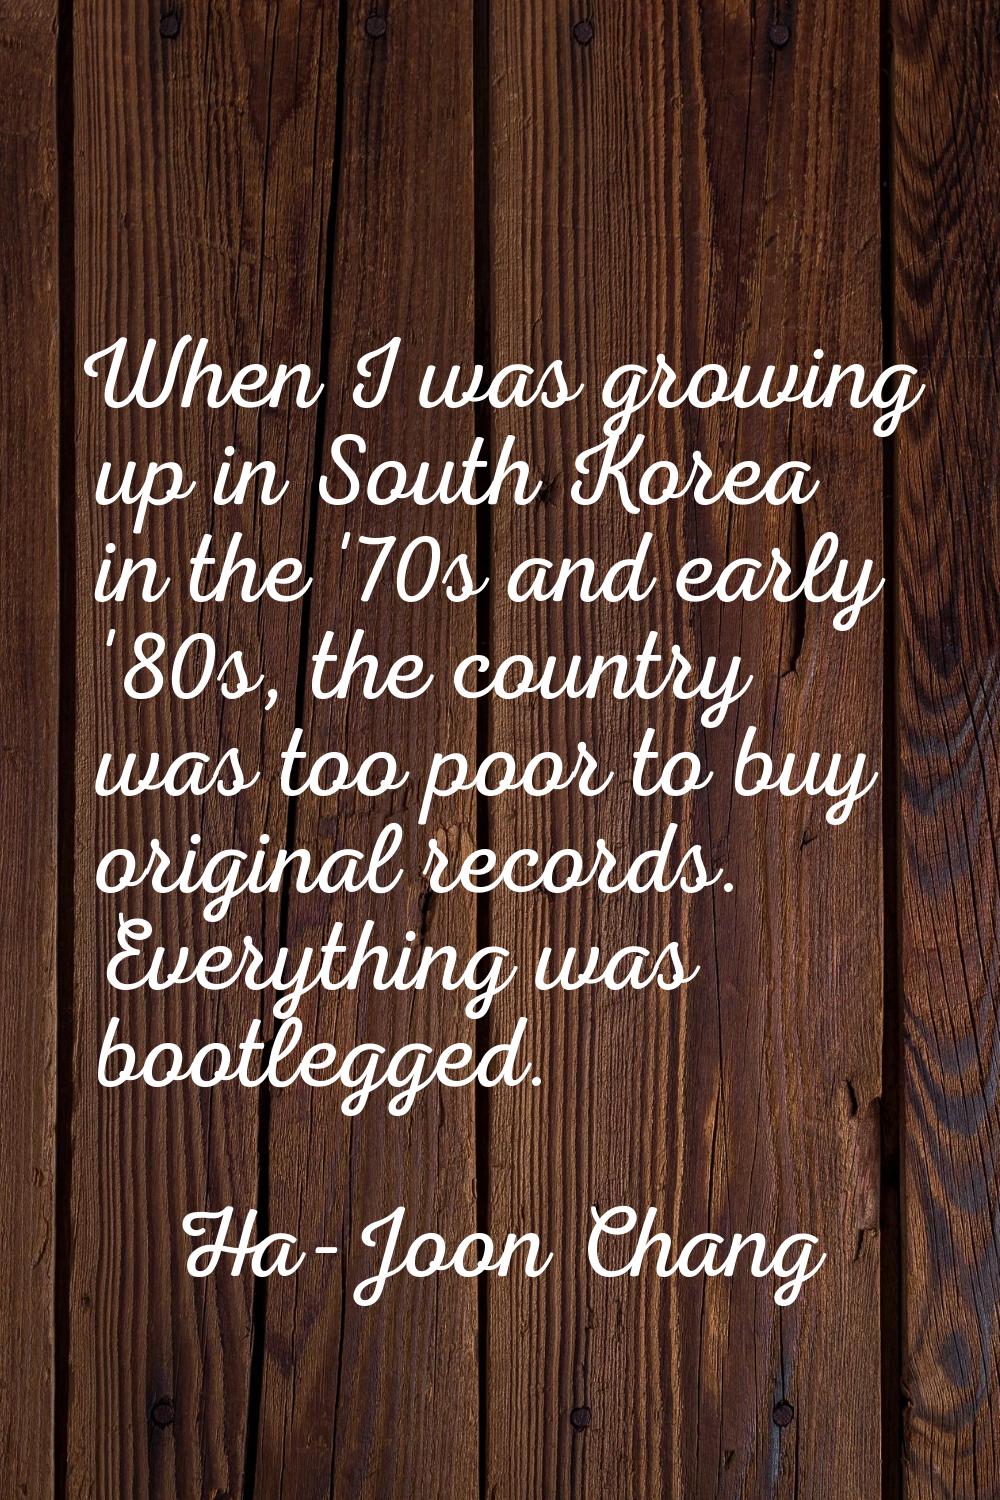 When I was growing up in South Korea in the '70s and early '80s, the country was too poor to buy or